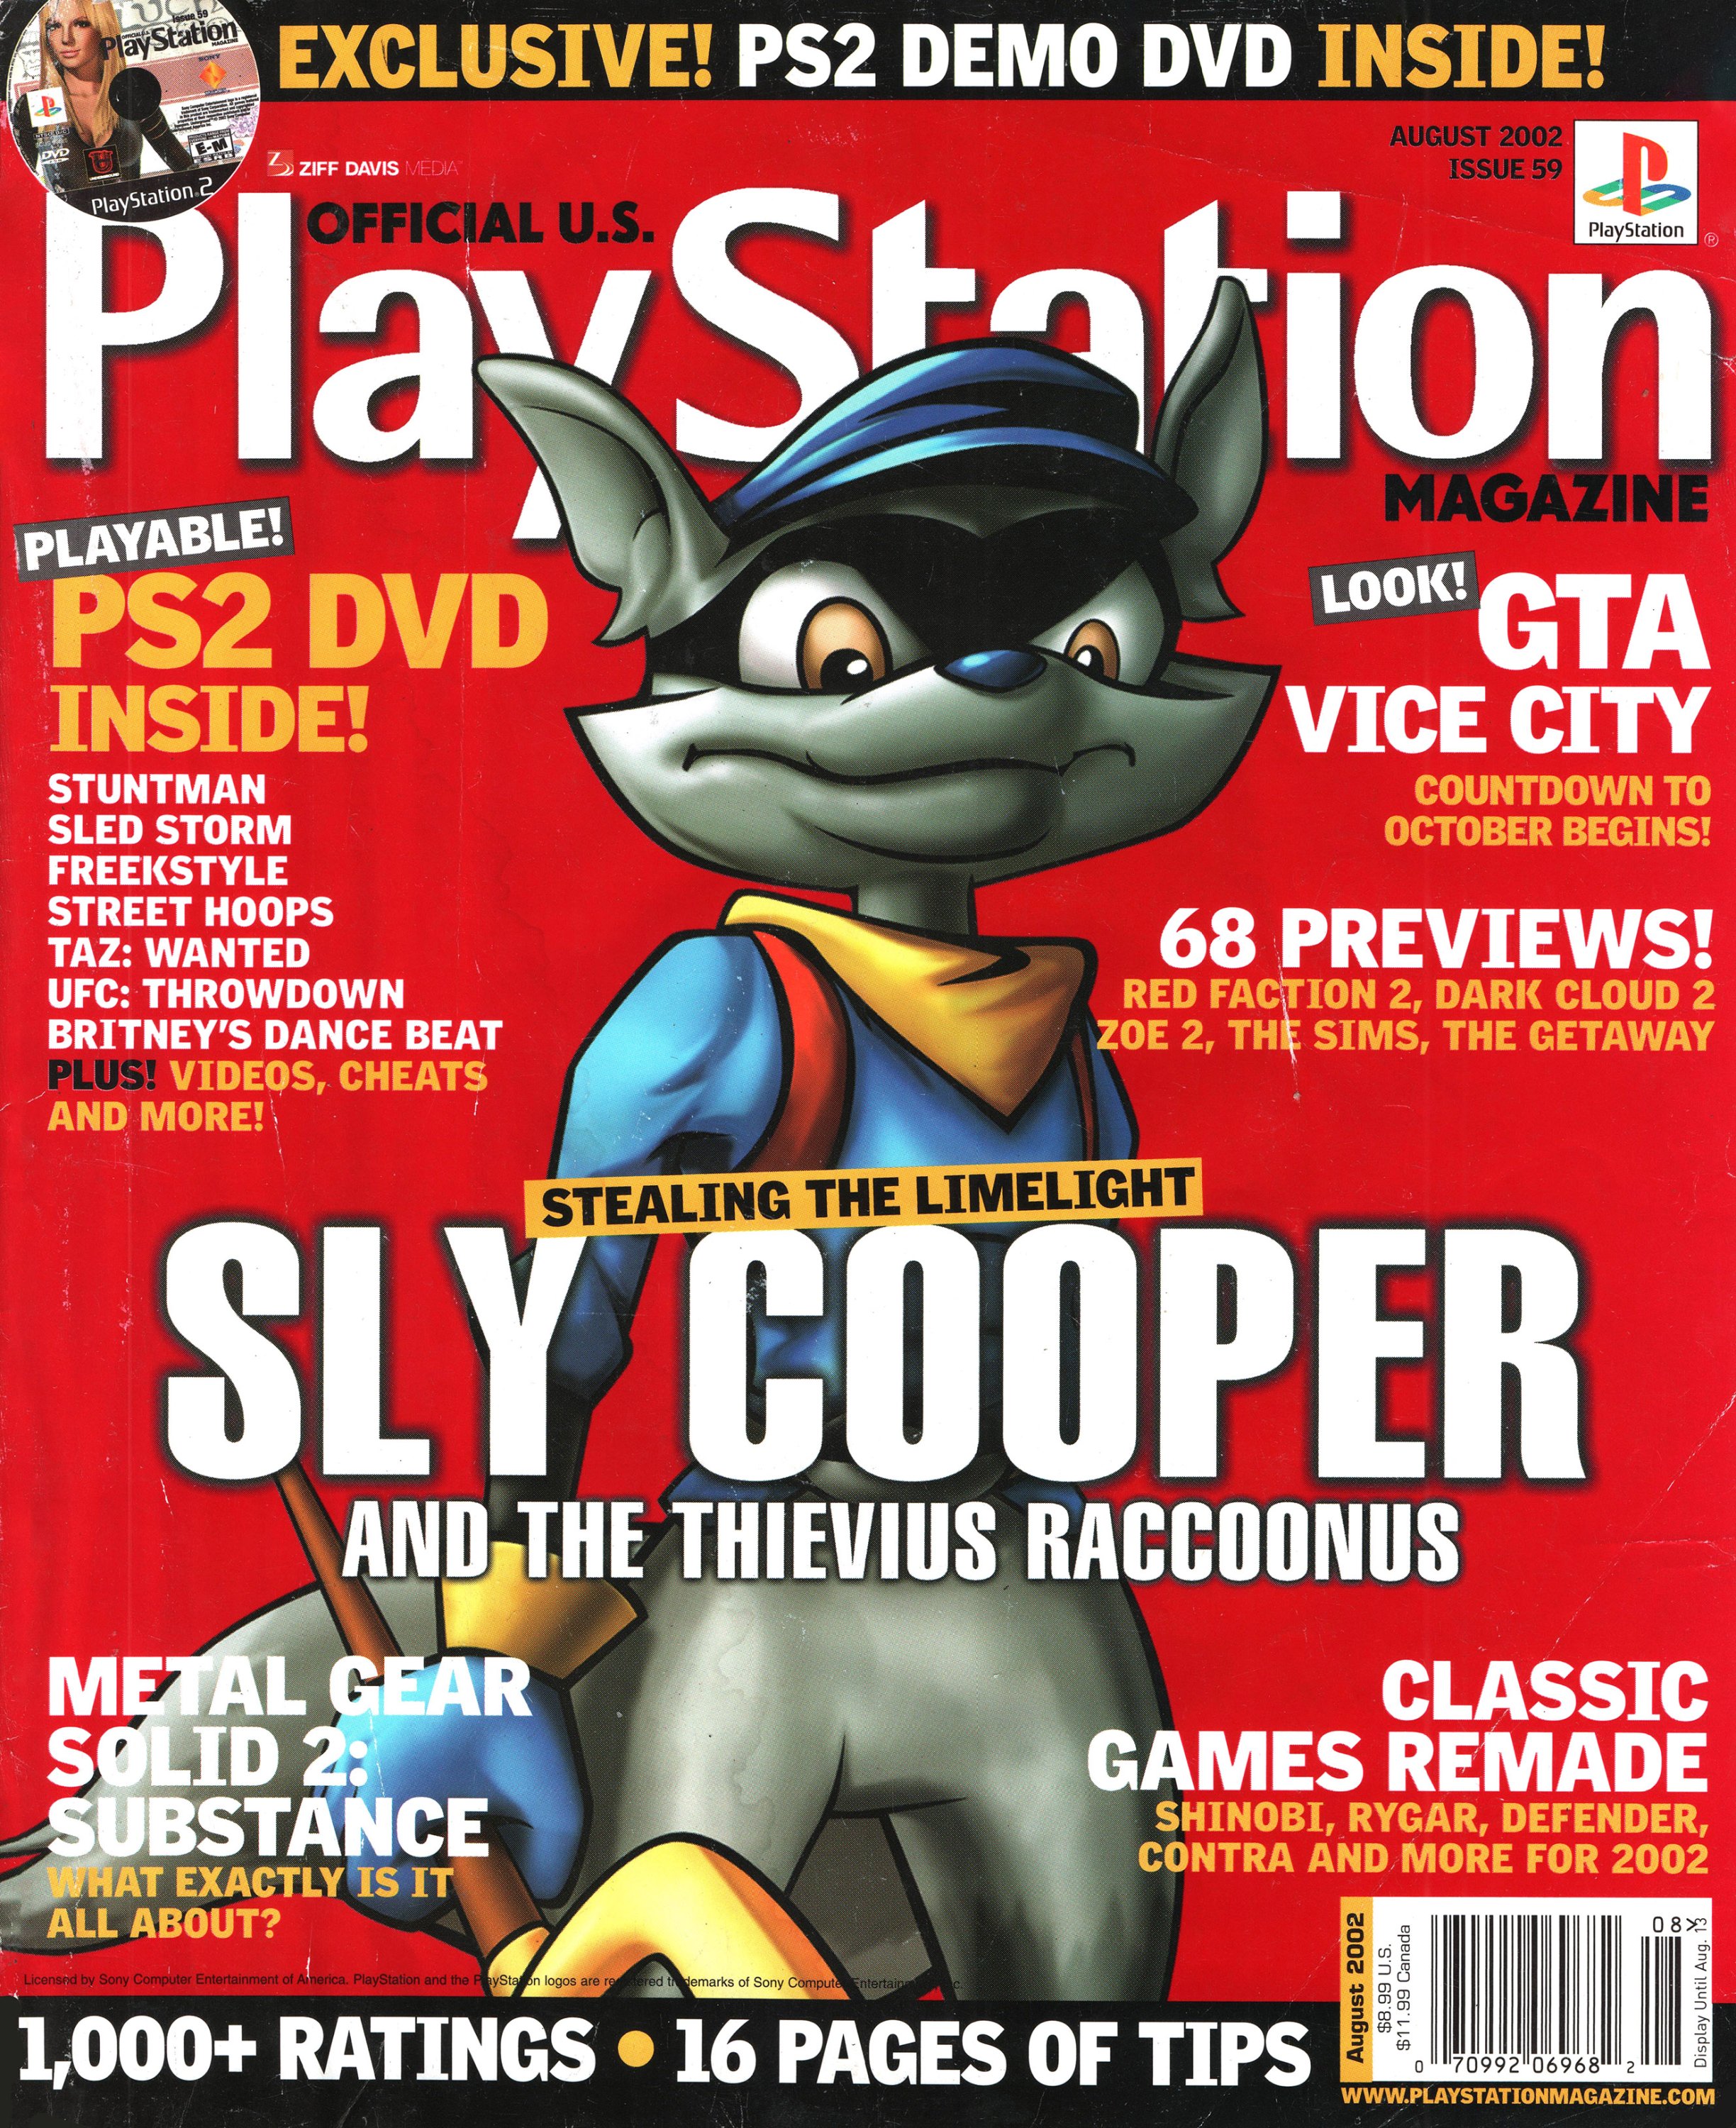 Official U.S. Playstation Magazine Issue 59 - Official U.S.